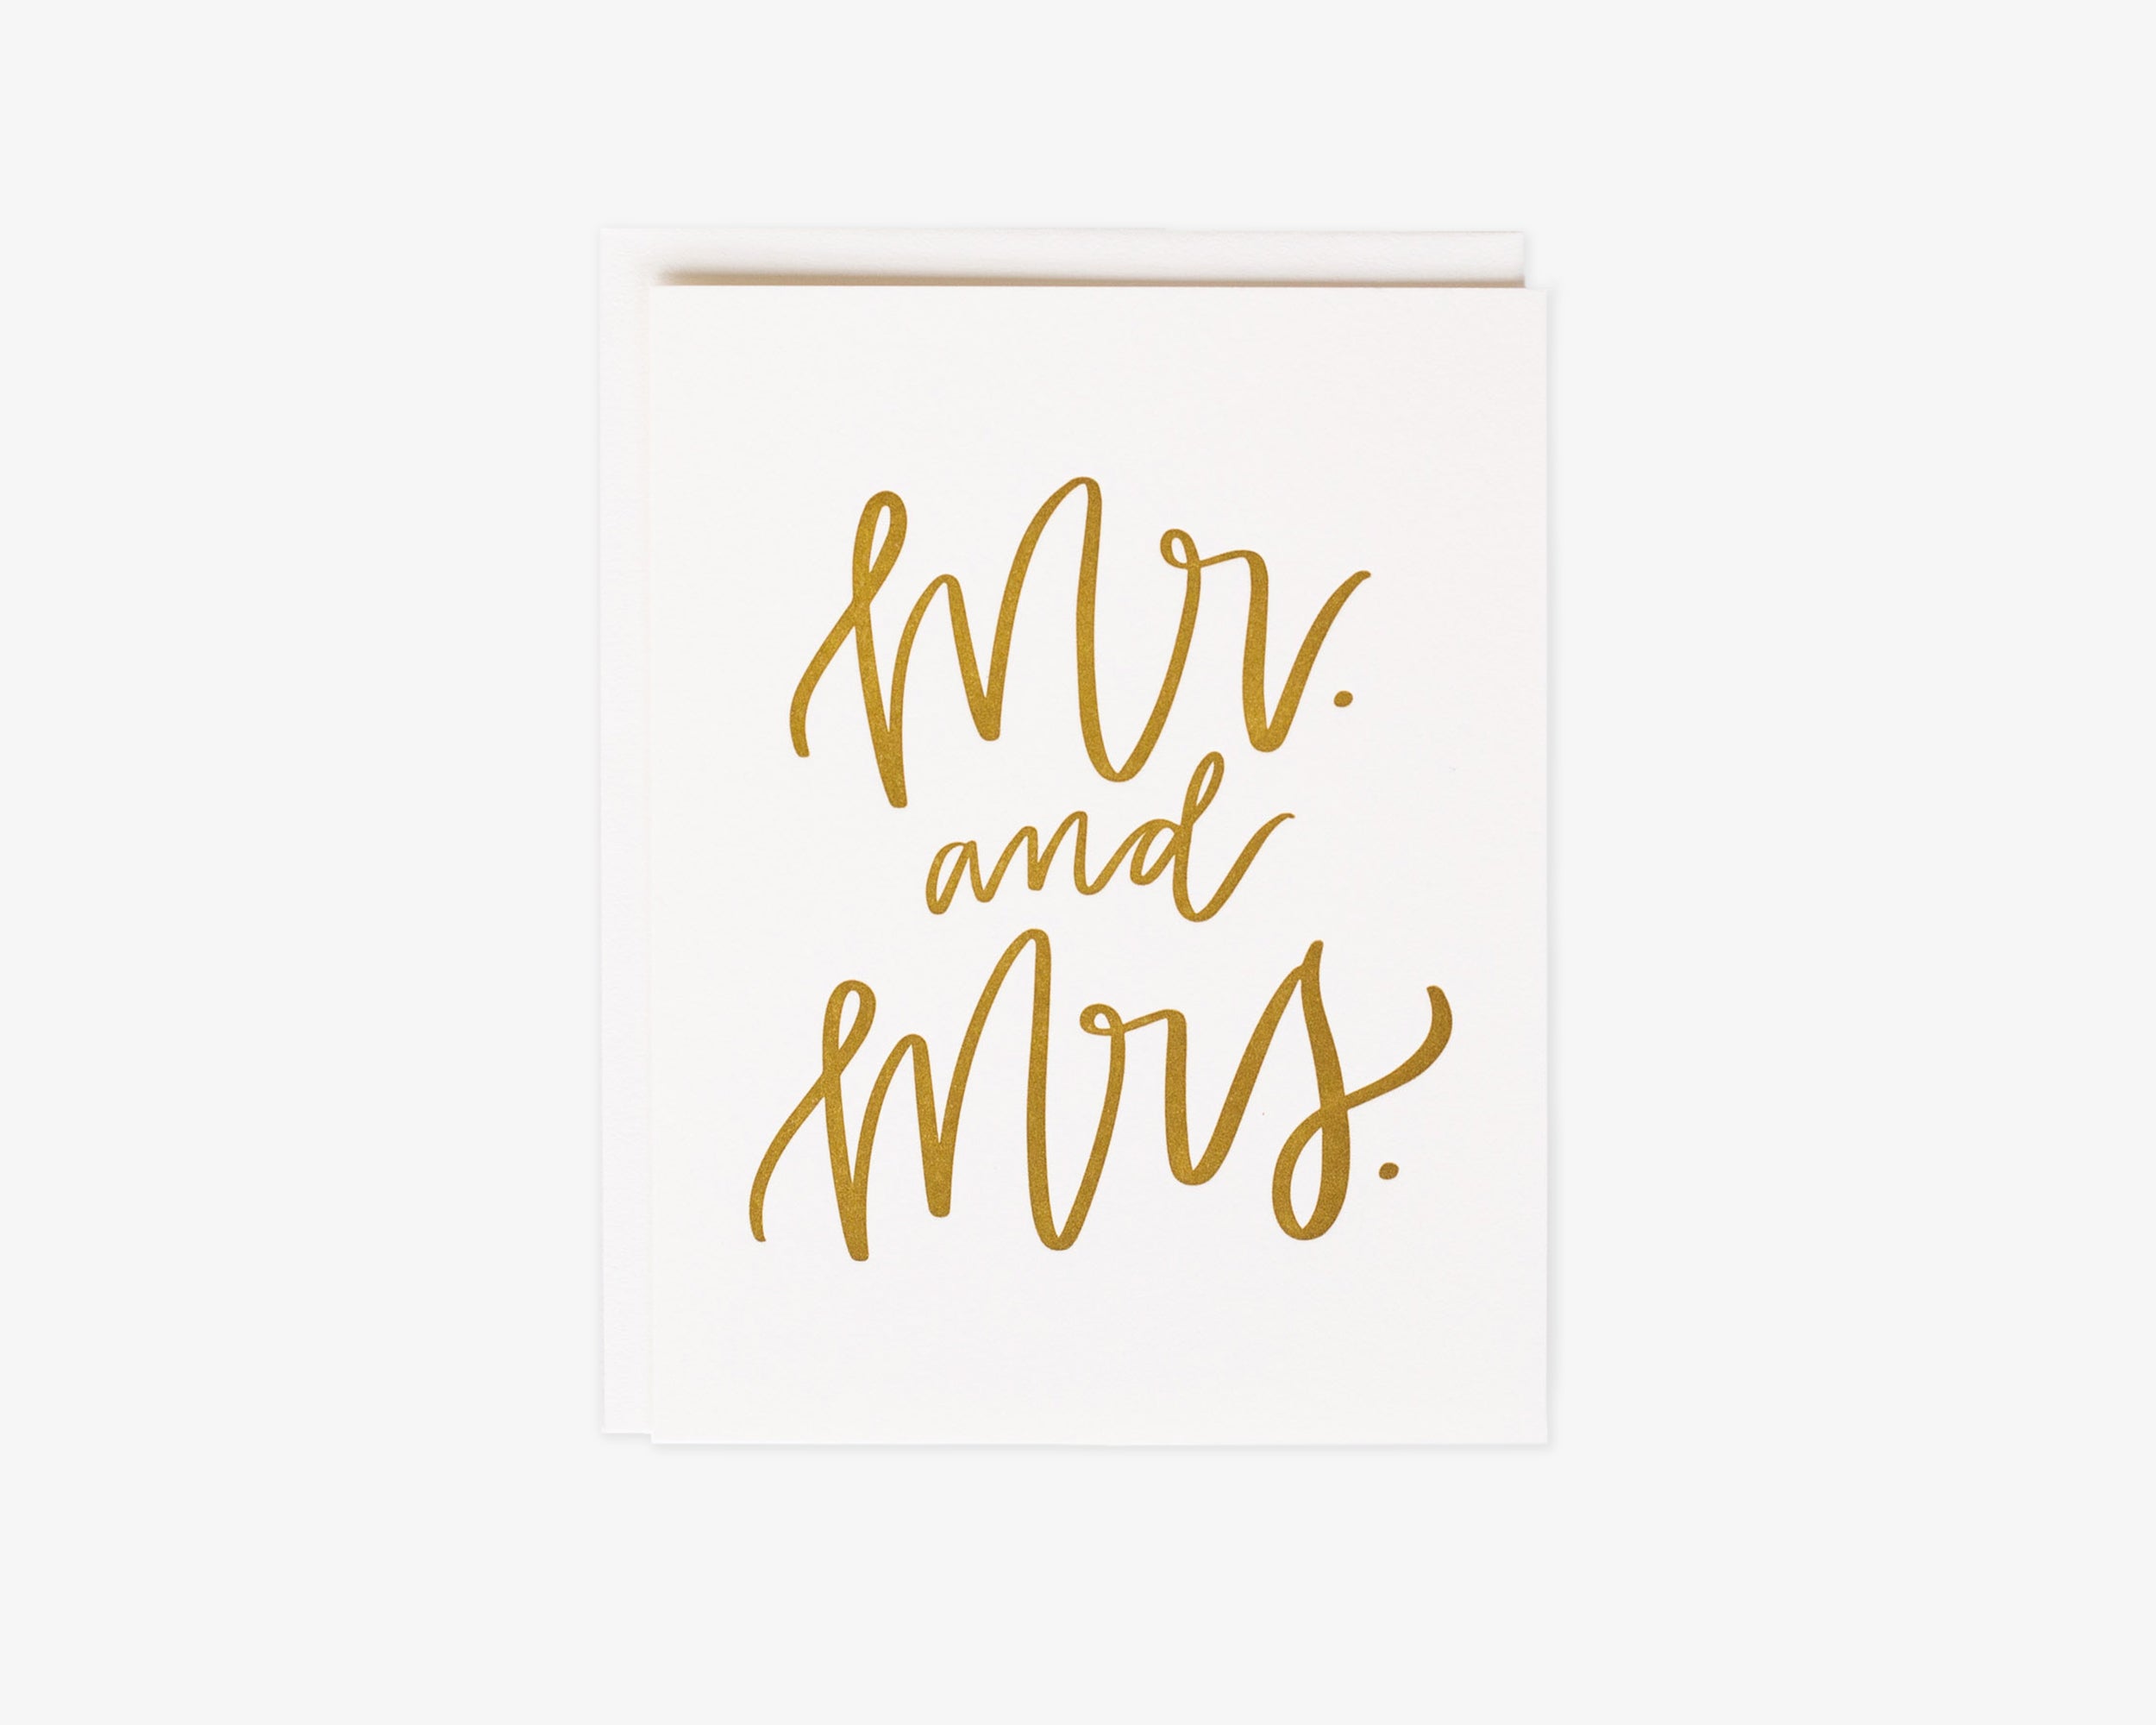 Mr. and Mrs. Card